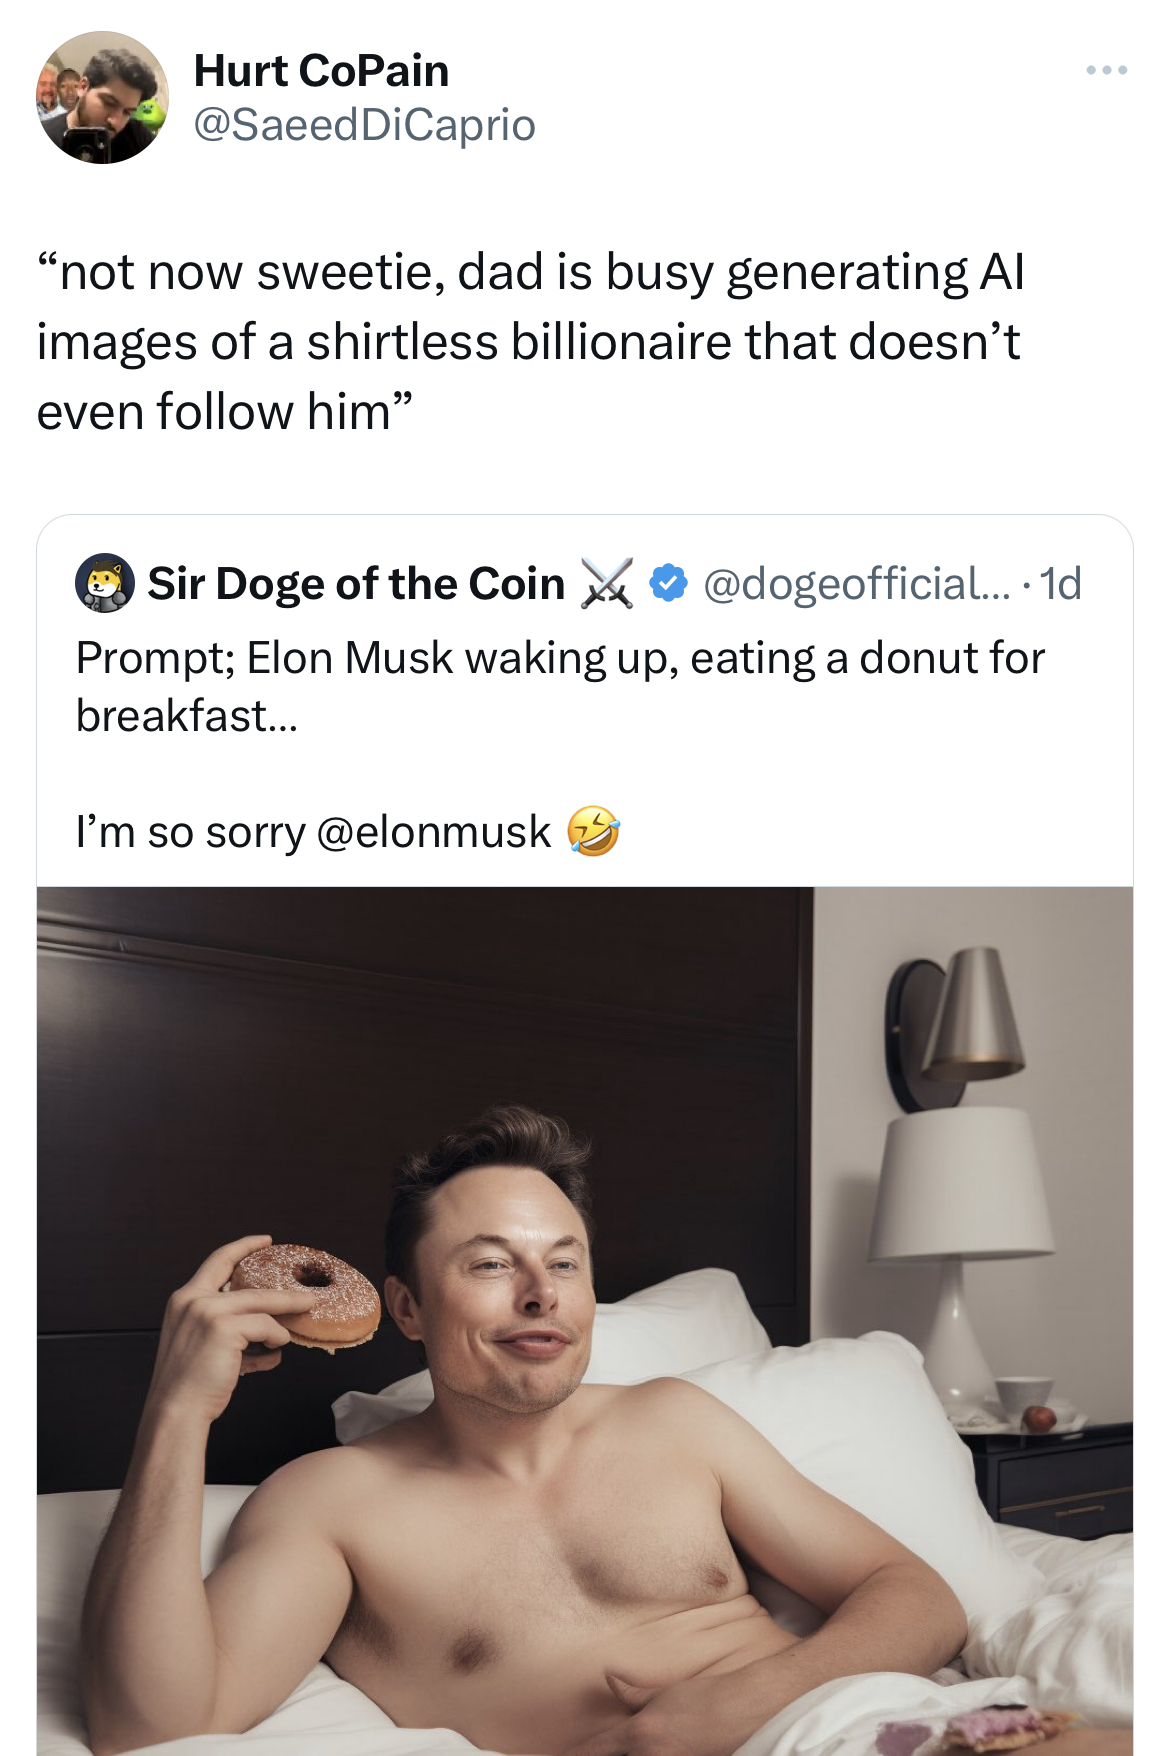 savage absurd tweets shoulder - Hurt CoPain "not now sweetie, dad is busy generating Al images of a shirtless billionaire that doesn't even him" www Sir Doge of the Coin .... 1d Prompt; Elon Musk waking up, eating a donut for breakfast... I'm so sorry